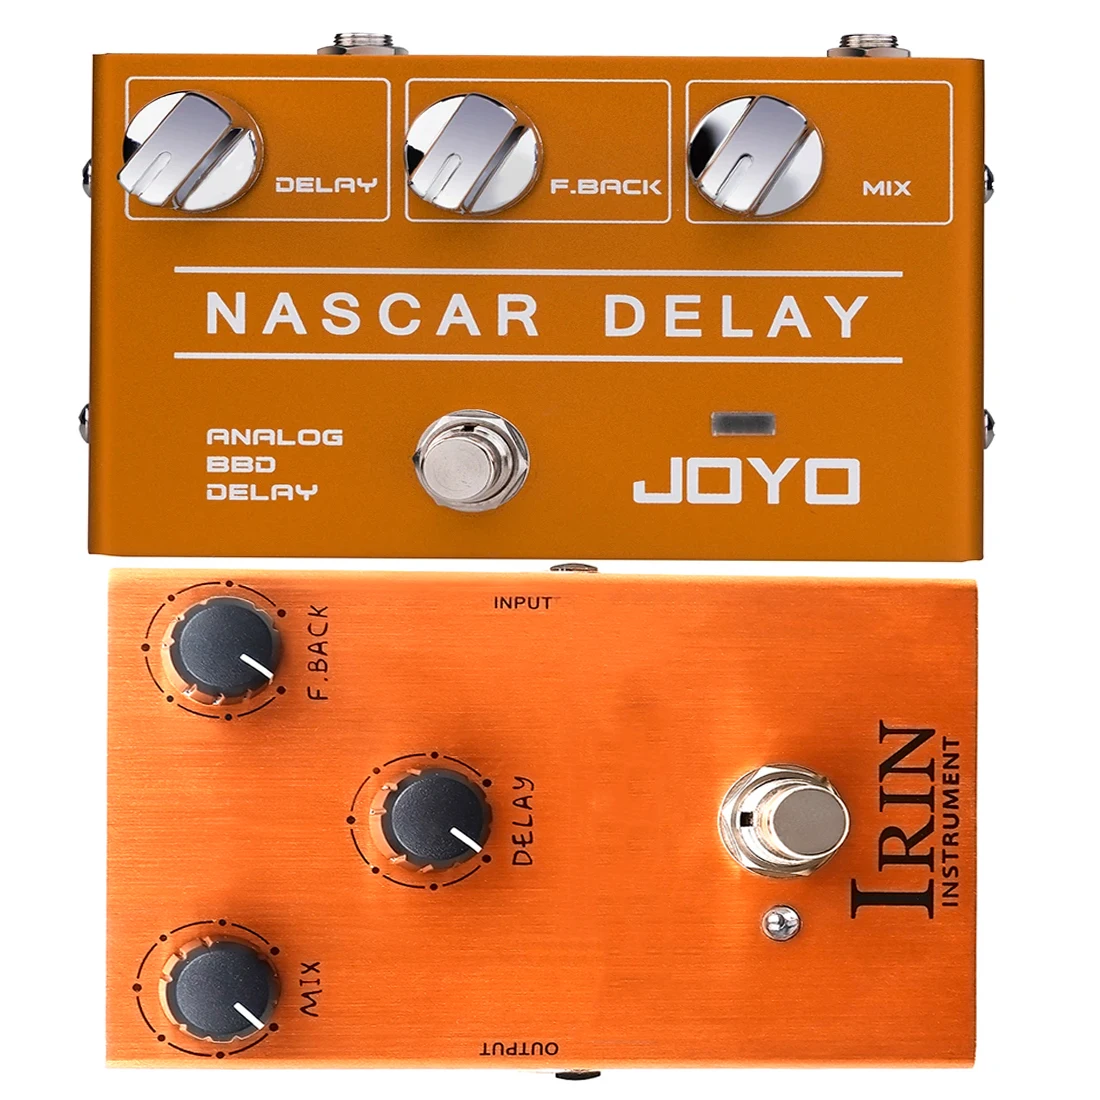 

JOYO R-10 NARCAR Analog Delay Pedal Classic Vintage Delay Effect Pedal for Electric Guitar Musical Instrument Accessories